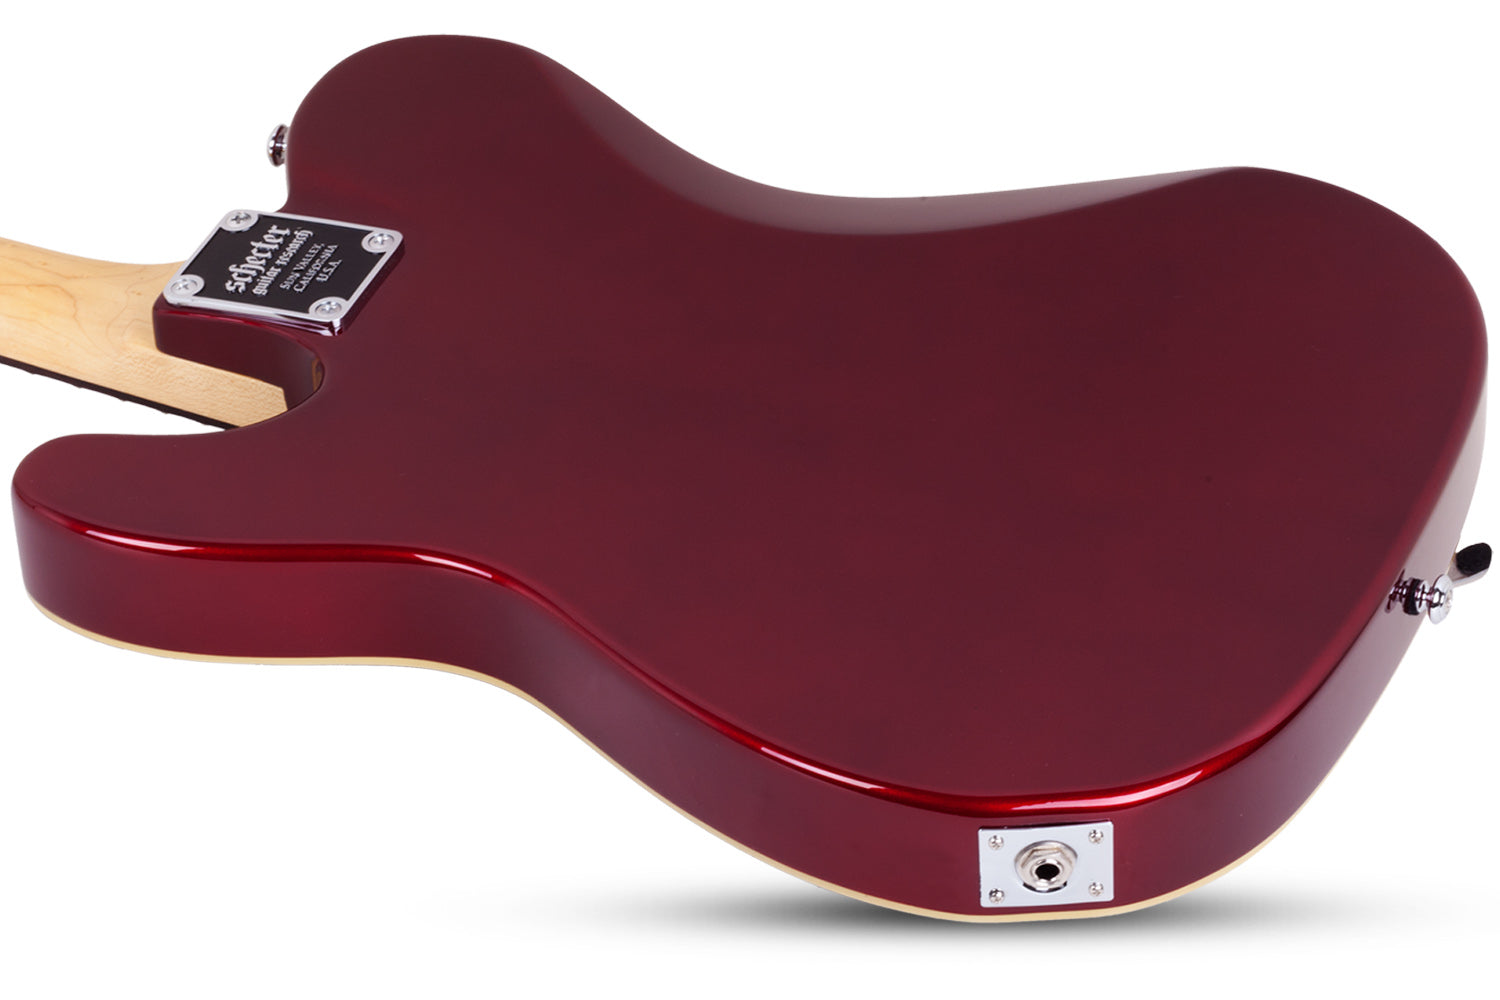 Schecter Vintage 6-String Electric Guitar Thin 'C' Shape Neck Rosewood Fretboard Metallic Red 2211-SHC - The Guitar World